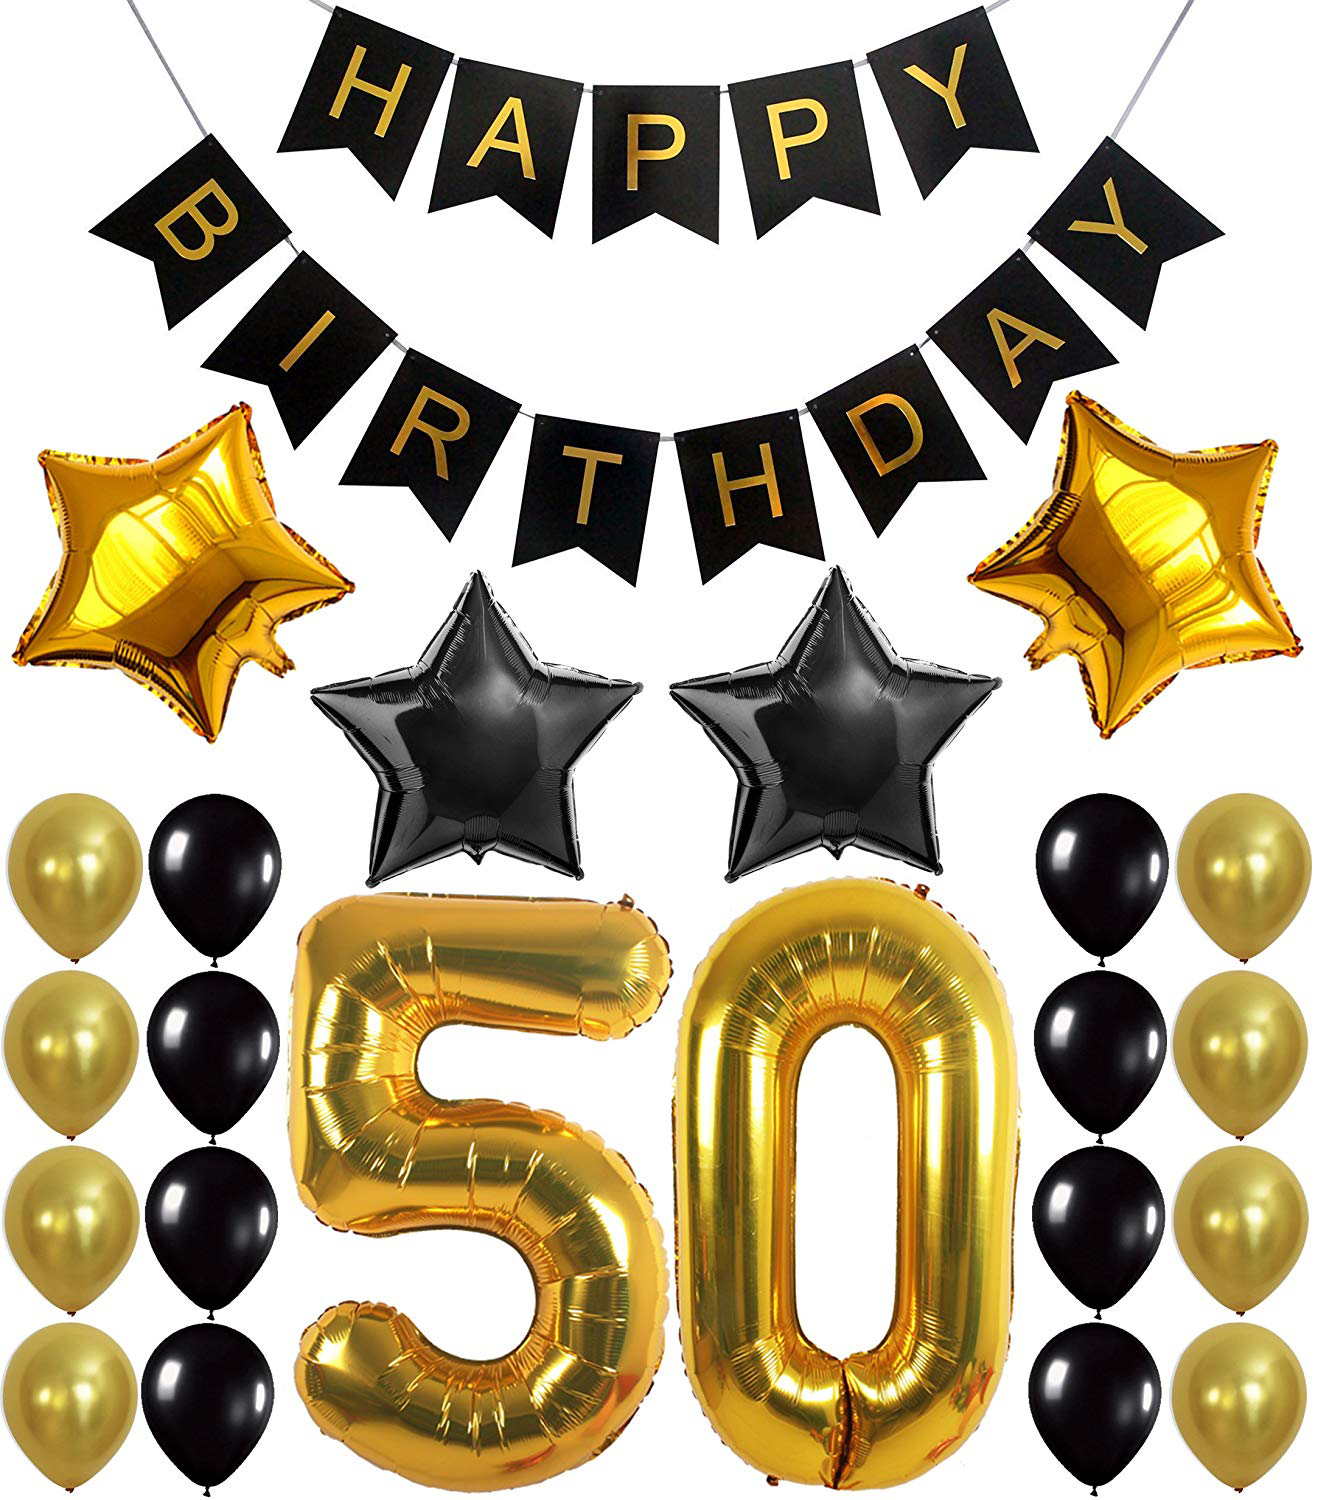 30th birthday decorations for hats 6 Count black gold theme 30th birthday party supplies for men women cone hats with gold glitter cardstock